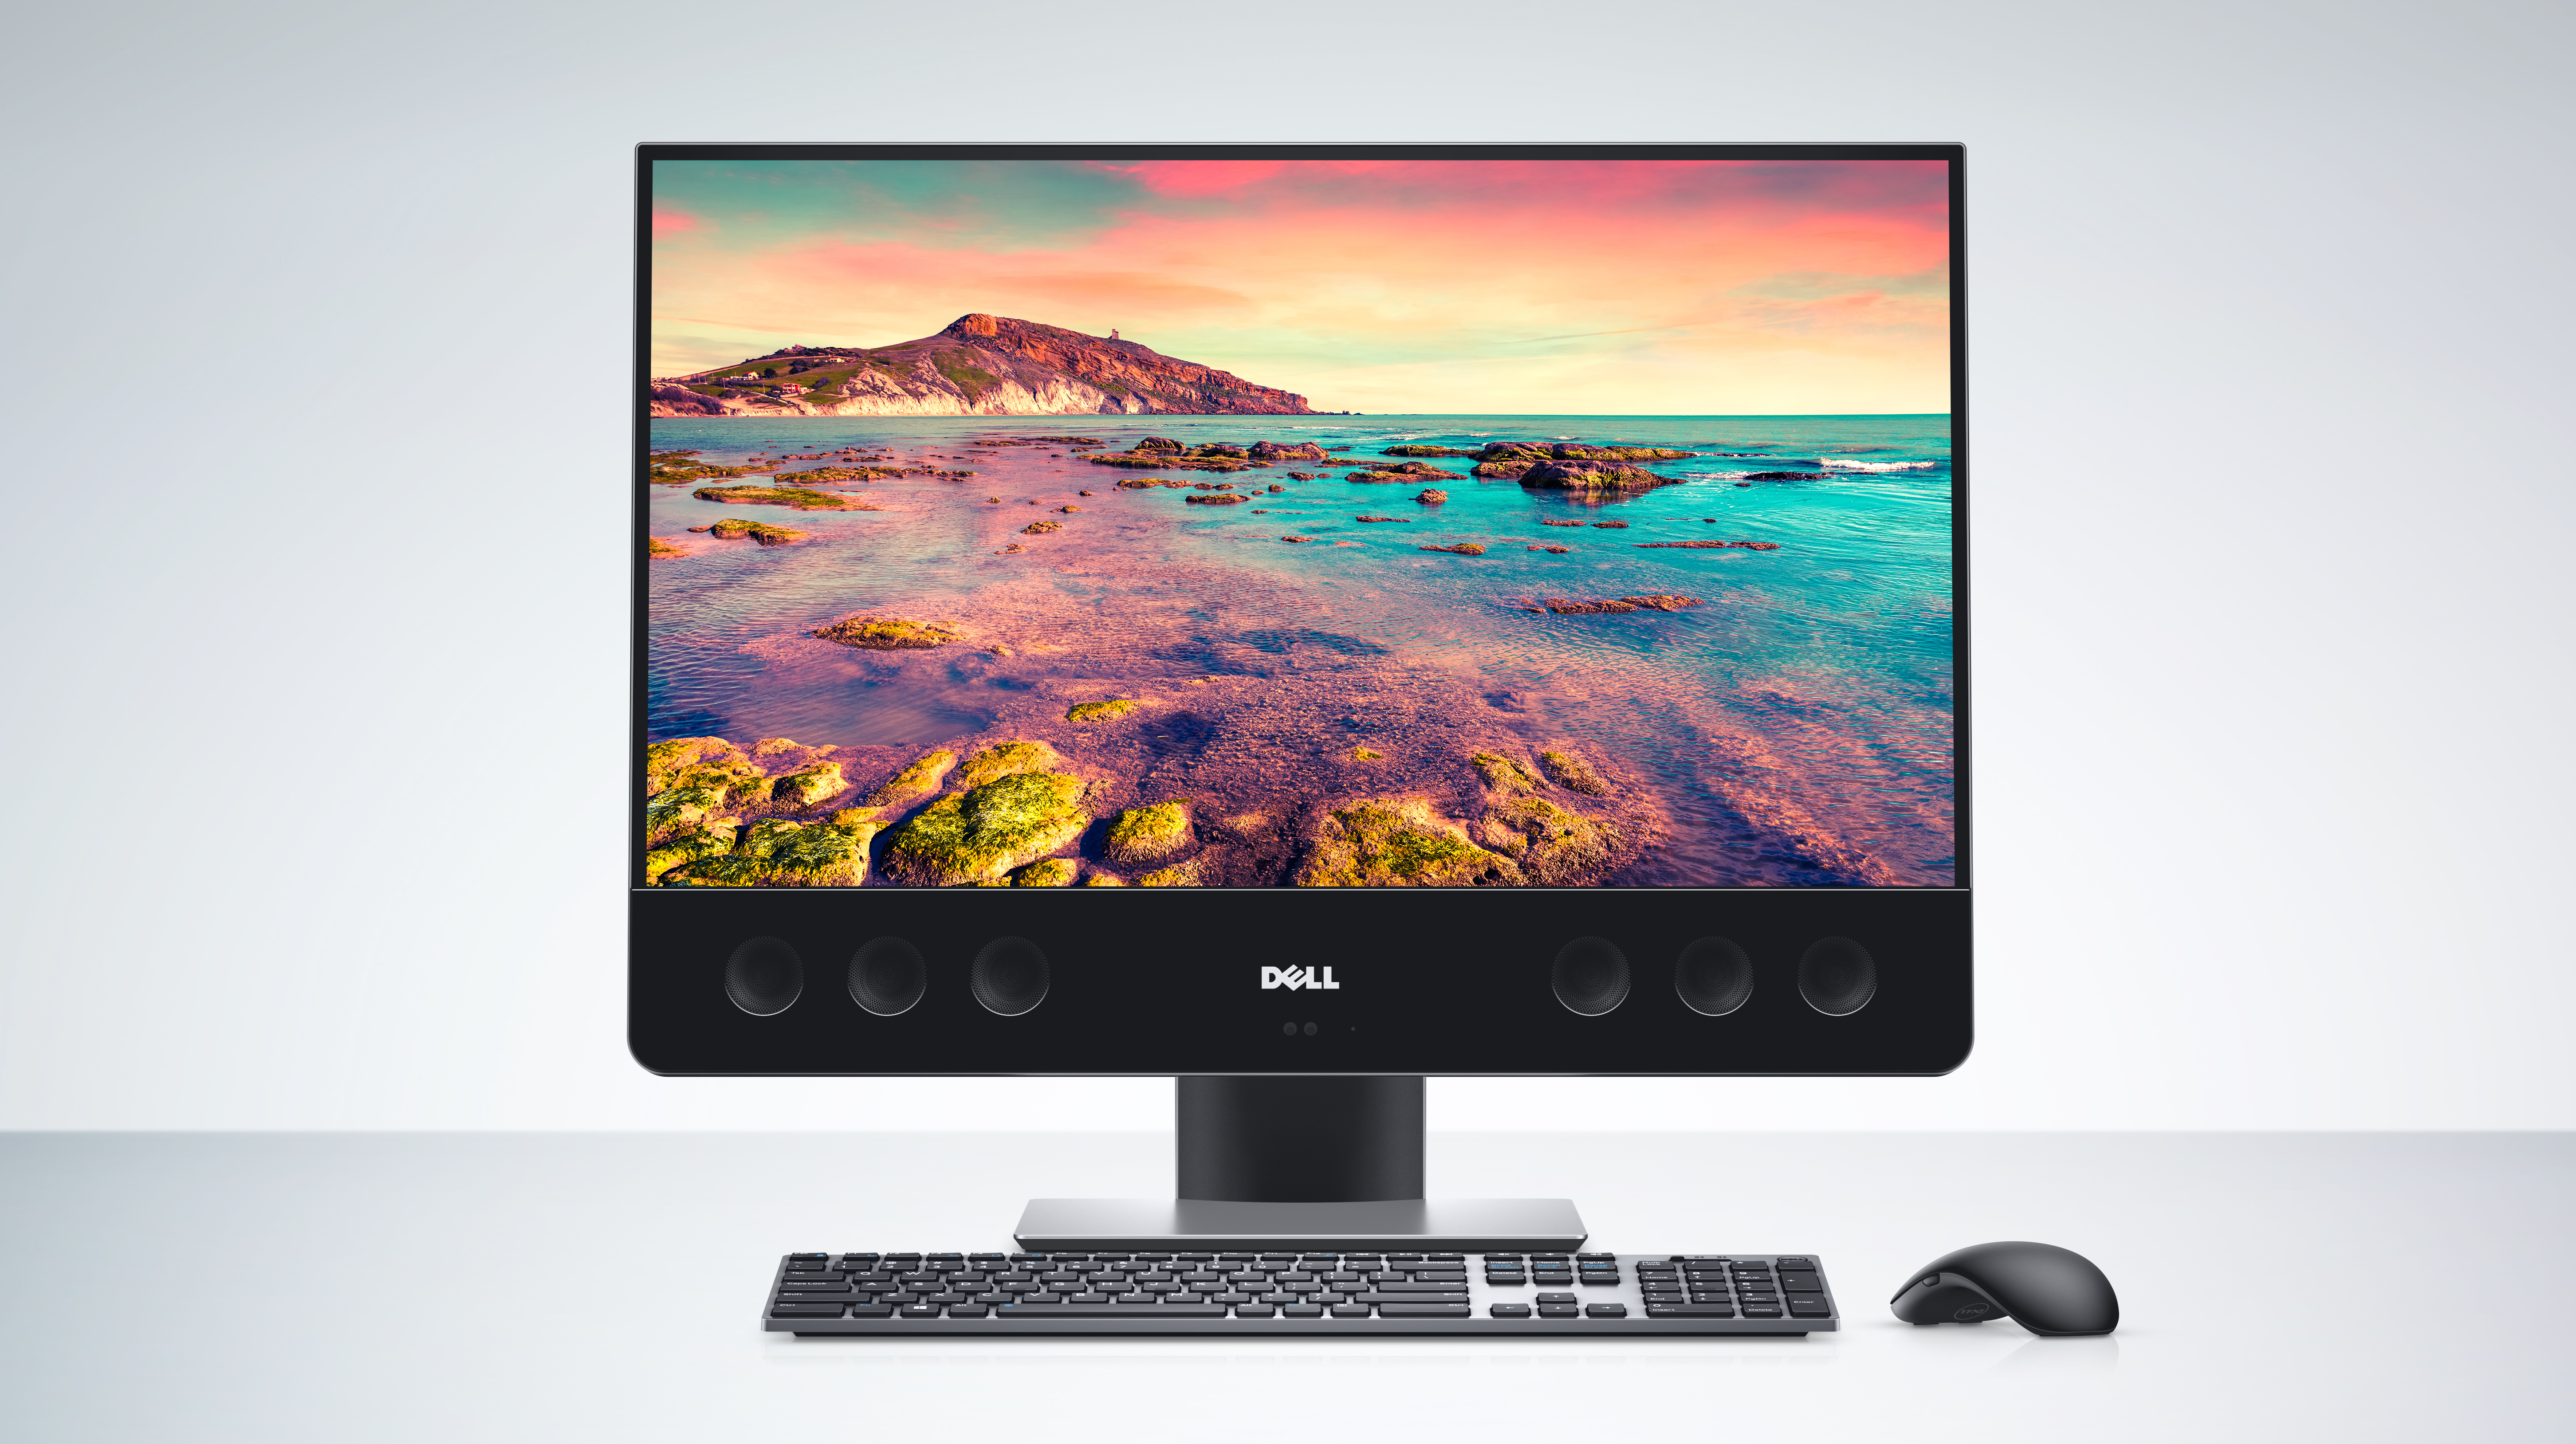 XPS & Precision all-in-ones with Windows 10